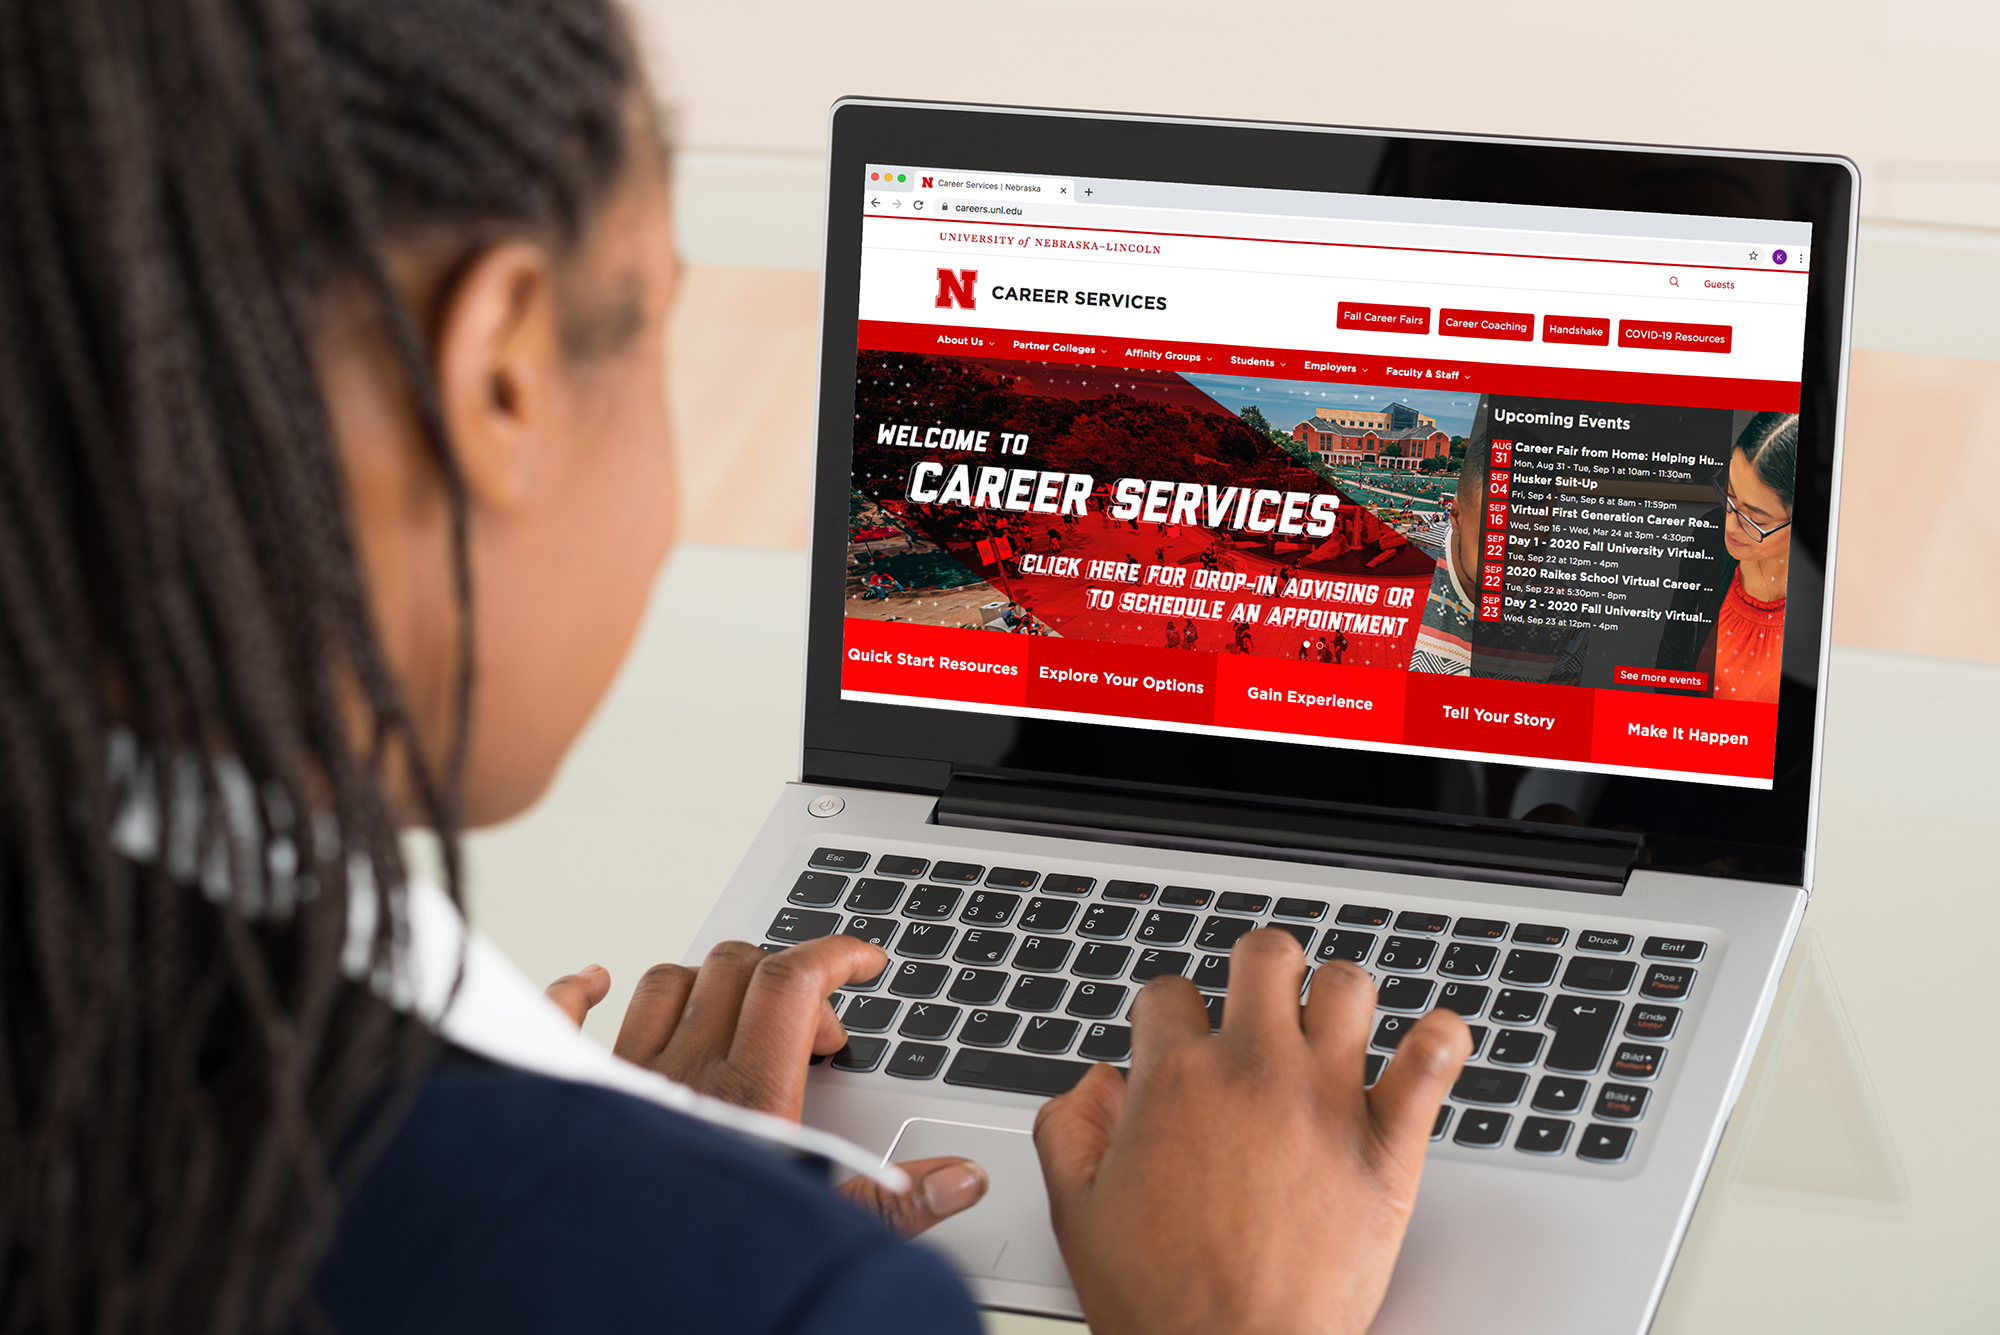 The Career Services website provides resources and career-related activities for students, faculty, and staff.